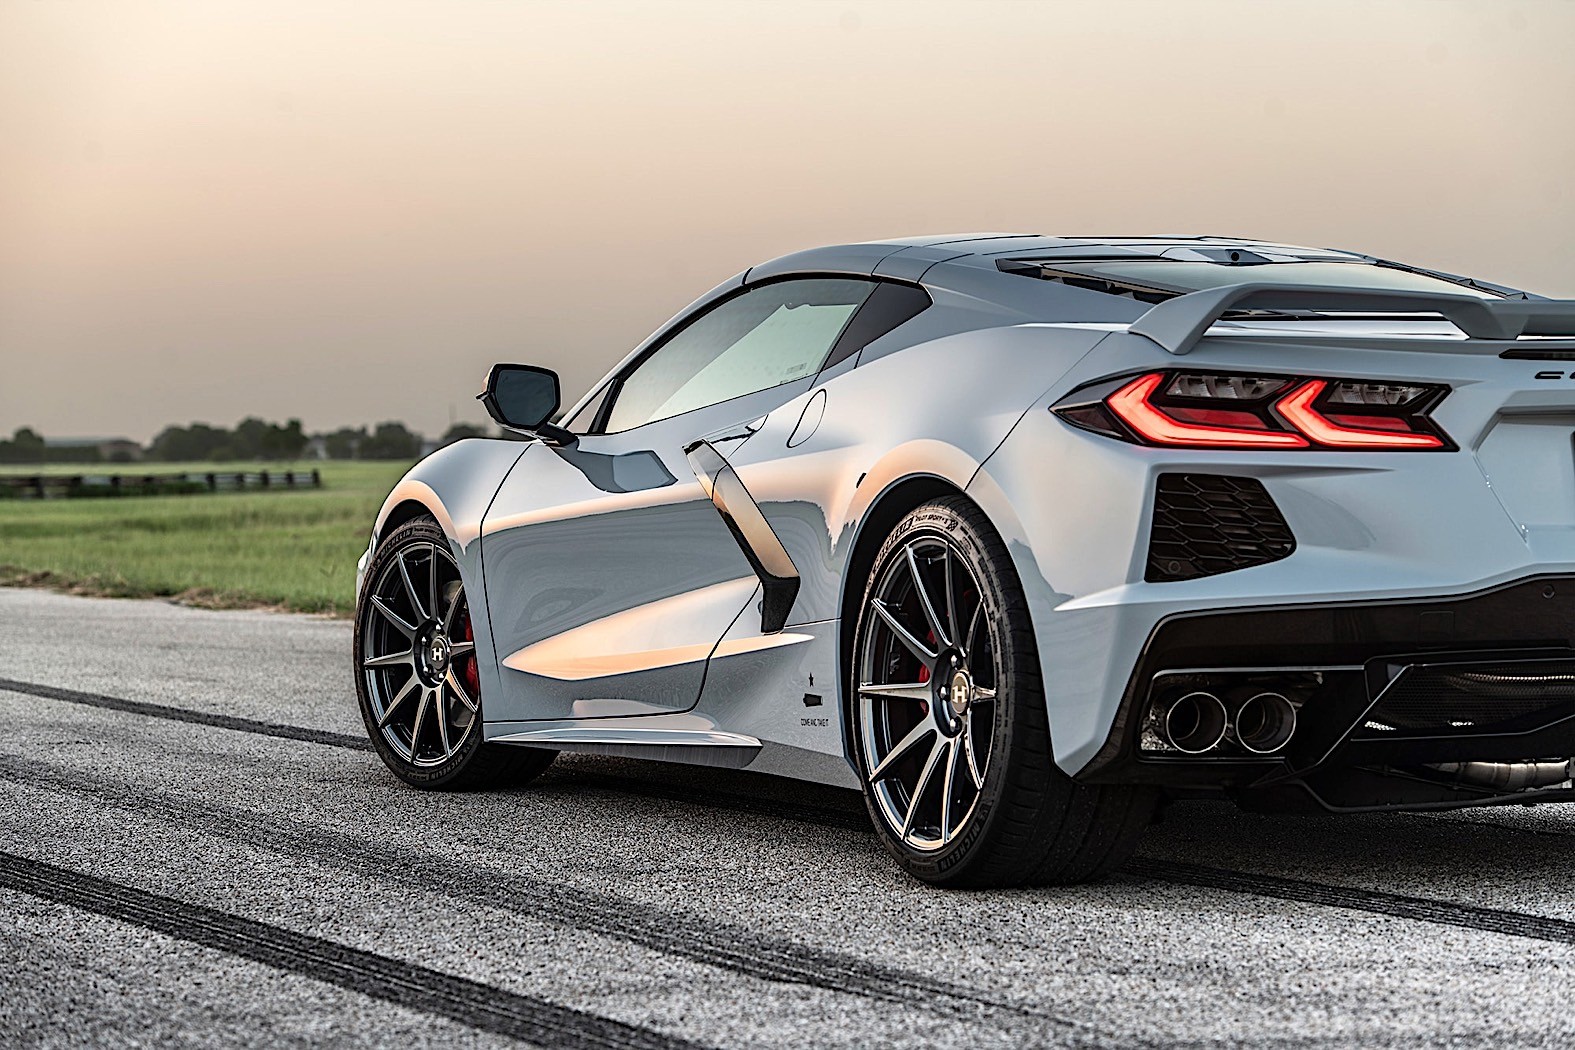 Hennessey Corvette C8 Wheels Are Here, 22 Lbs Lighter and Priced at